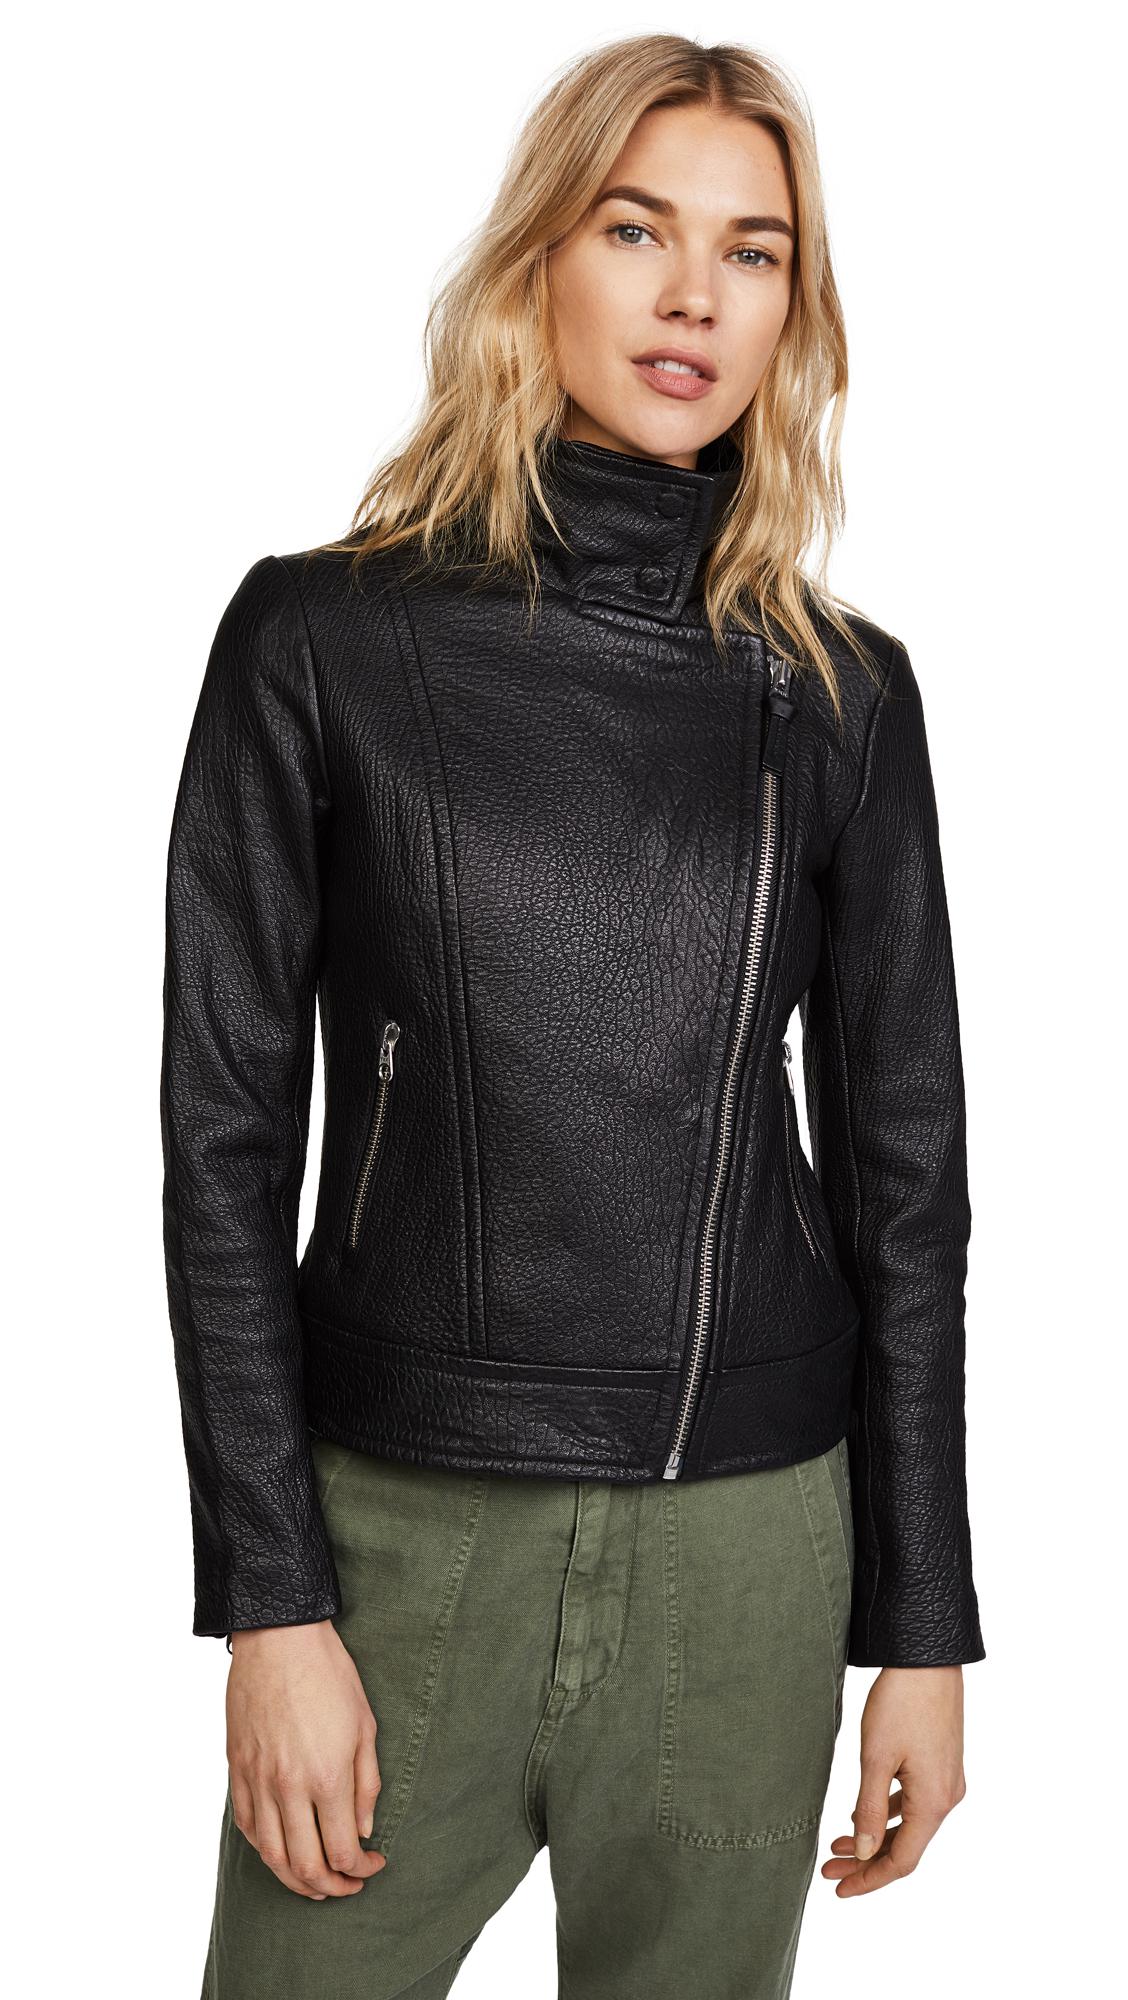 Lyst - Mackage Lisa Pebbled Leather Jacket in Natural